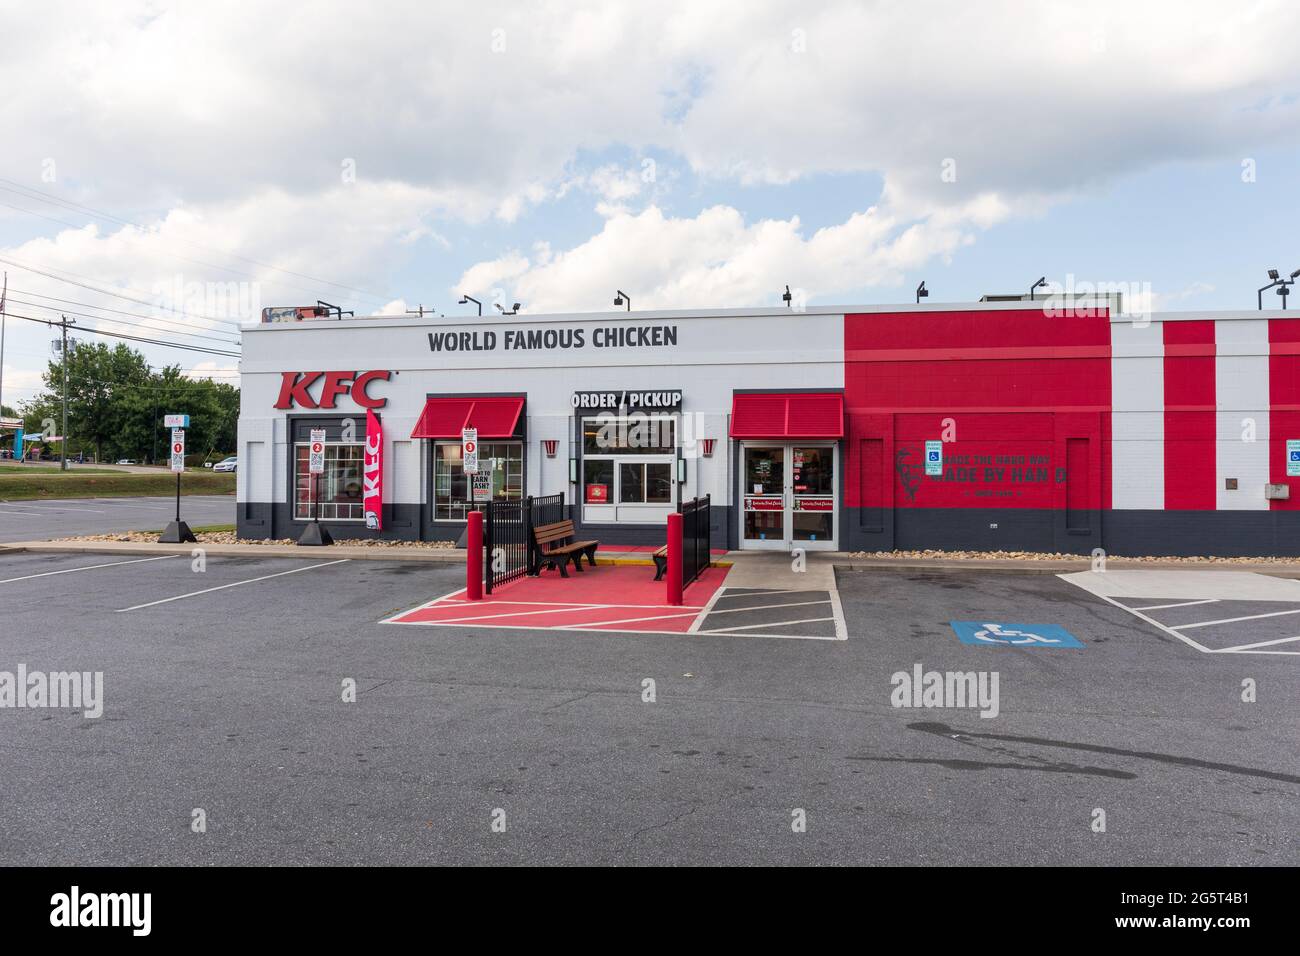 MORGANTON, NC USA-23 JUNE 2021: A bright, freshly painted red and white KFC (Kentucky Fried Chicken) building. Stock Photo